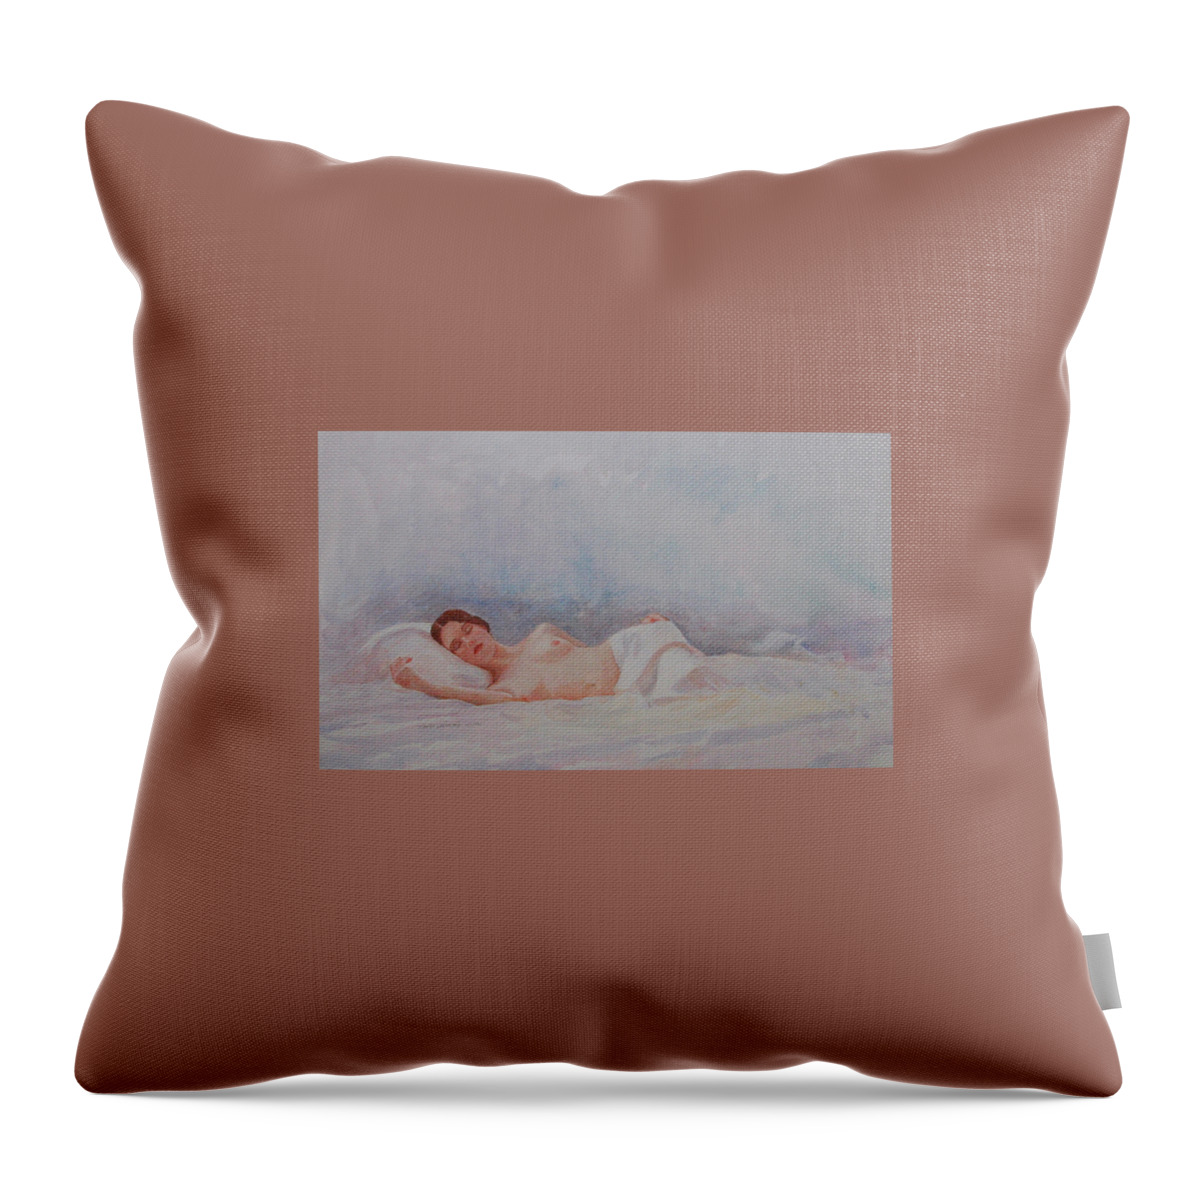 Reclining Nude Throw Pillow featuring the painting Reclining Nude 3 by David Ladmore